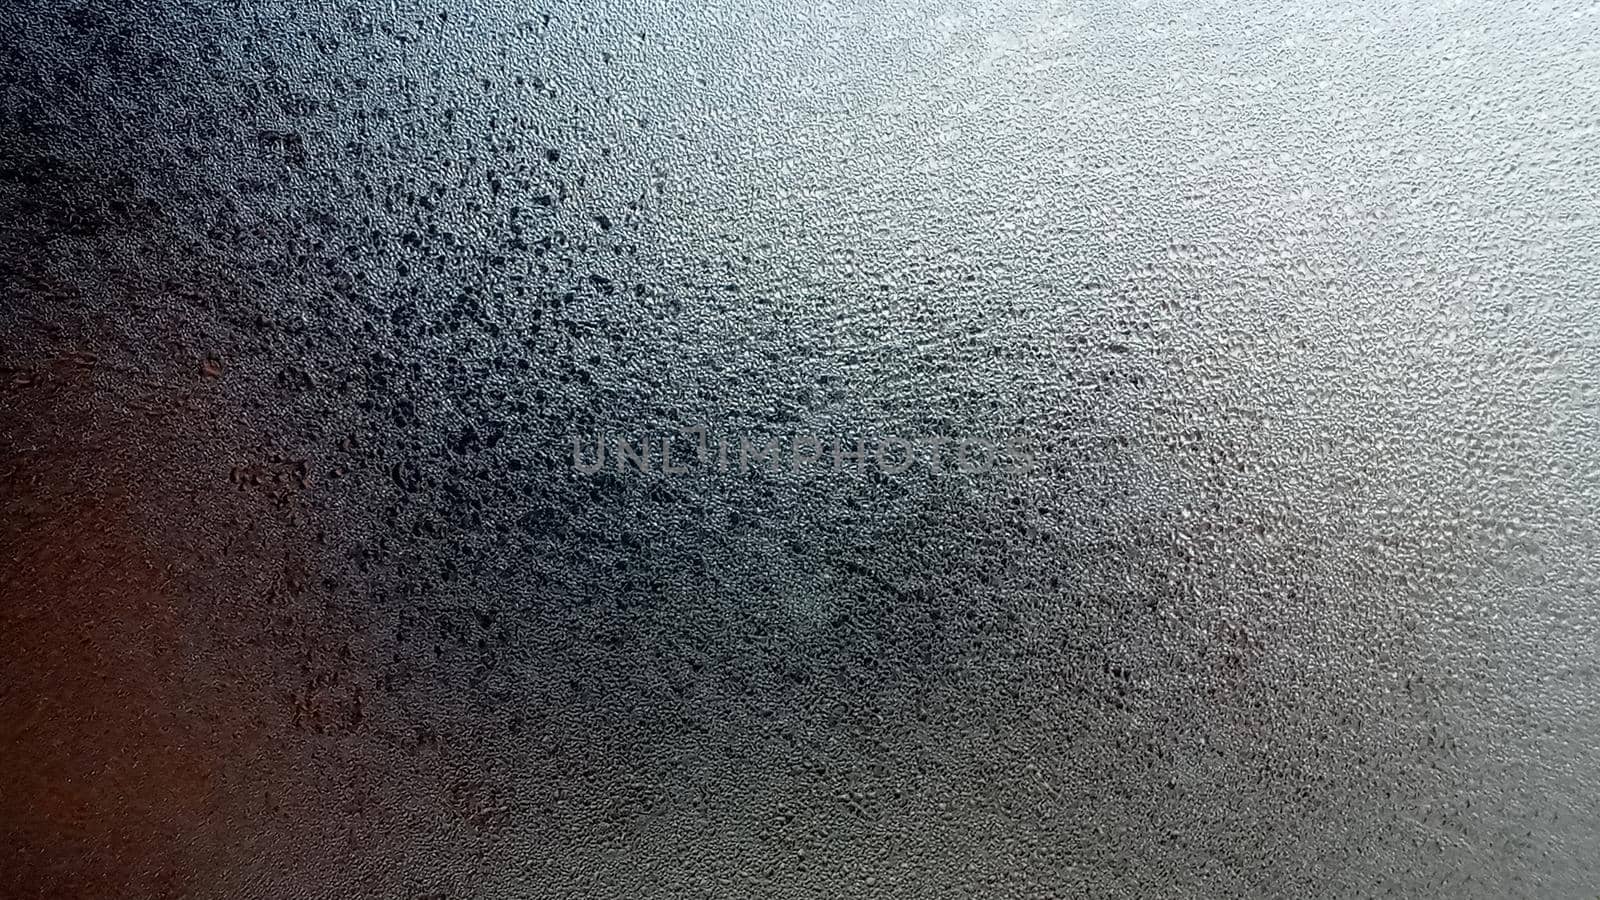 Abstract frosty pattern on glass, background texture. Frozen windshield. Granular structure of transparent ice. The sky is shining through. Abstract ice background.